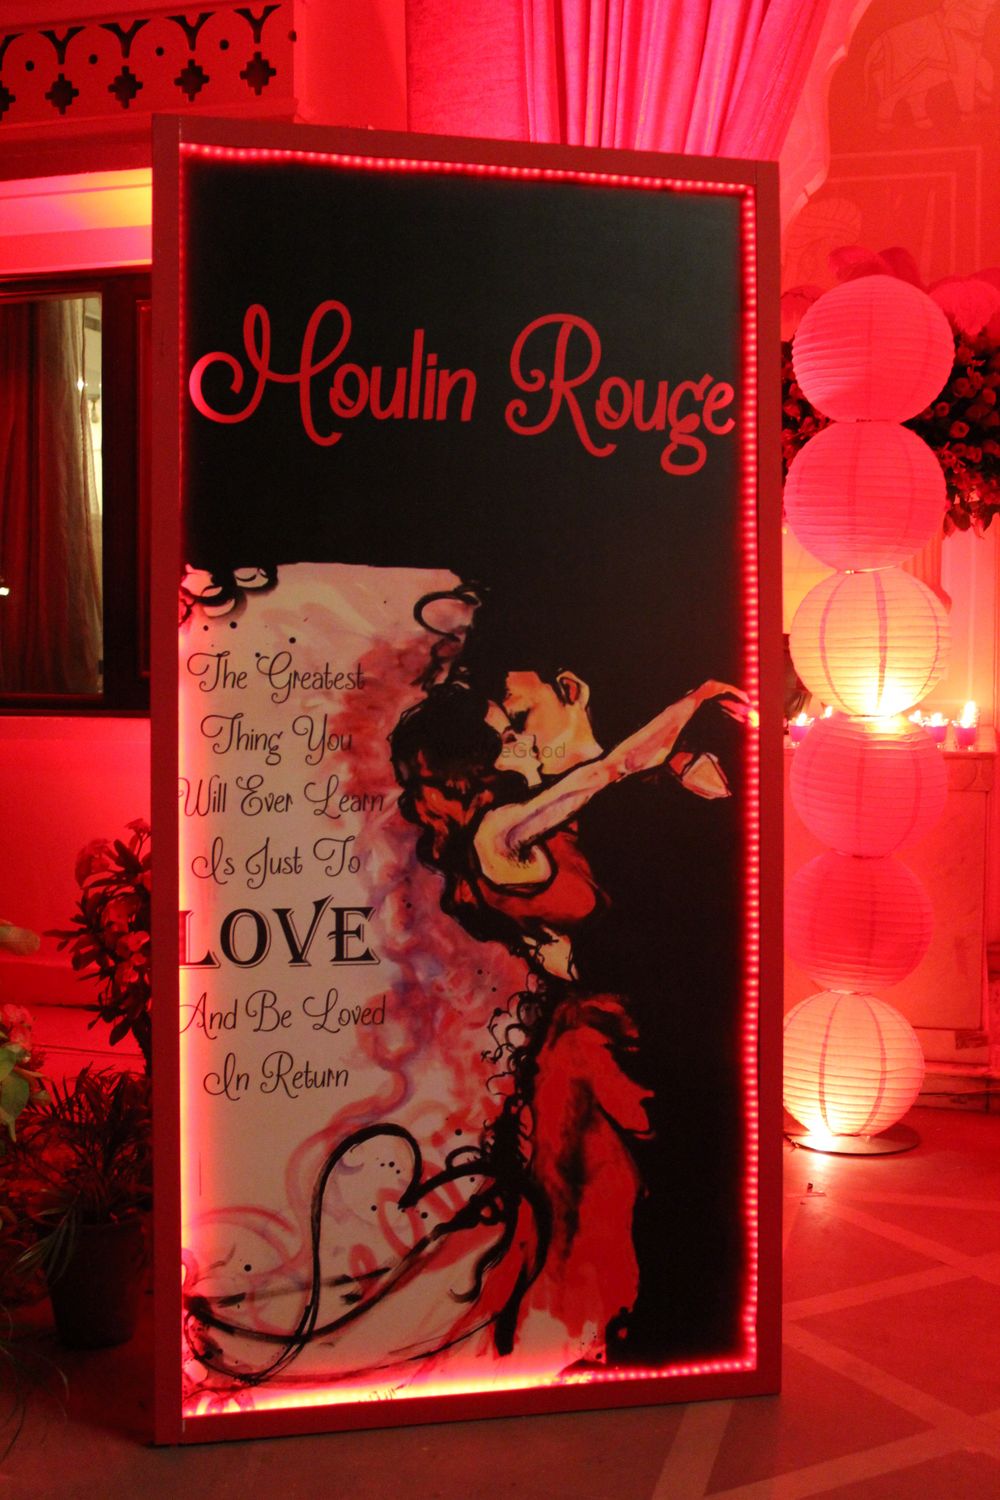 Photo From Moulin Rouge - Welcome Dinner - By Comme Sogno Vero by Ankiit Malhotra